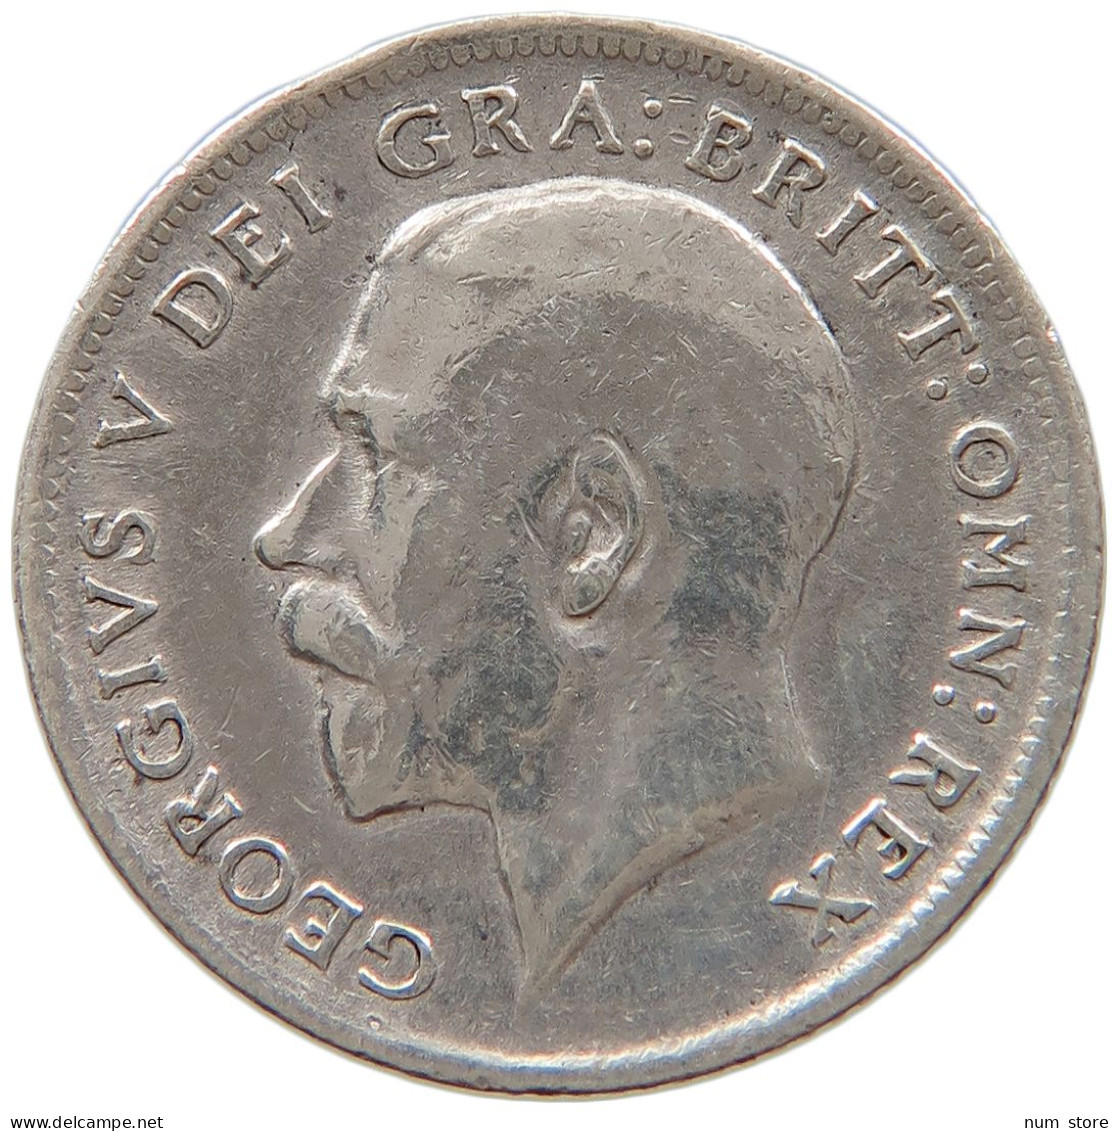 GREAT BRITAIN SIXPENCE 1916 George V. (1910-1936) #s017 0051 - H. 6 Pence